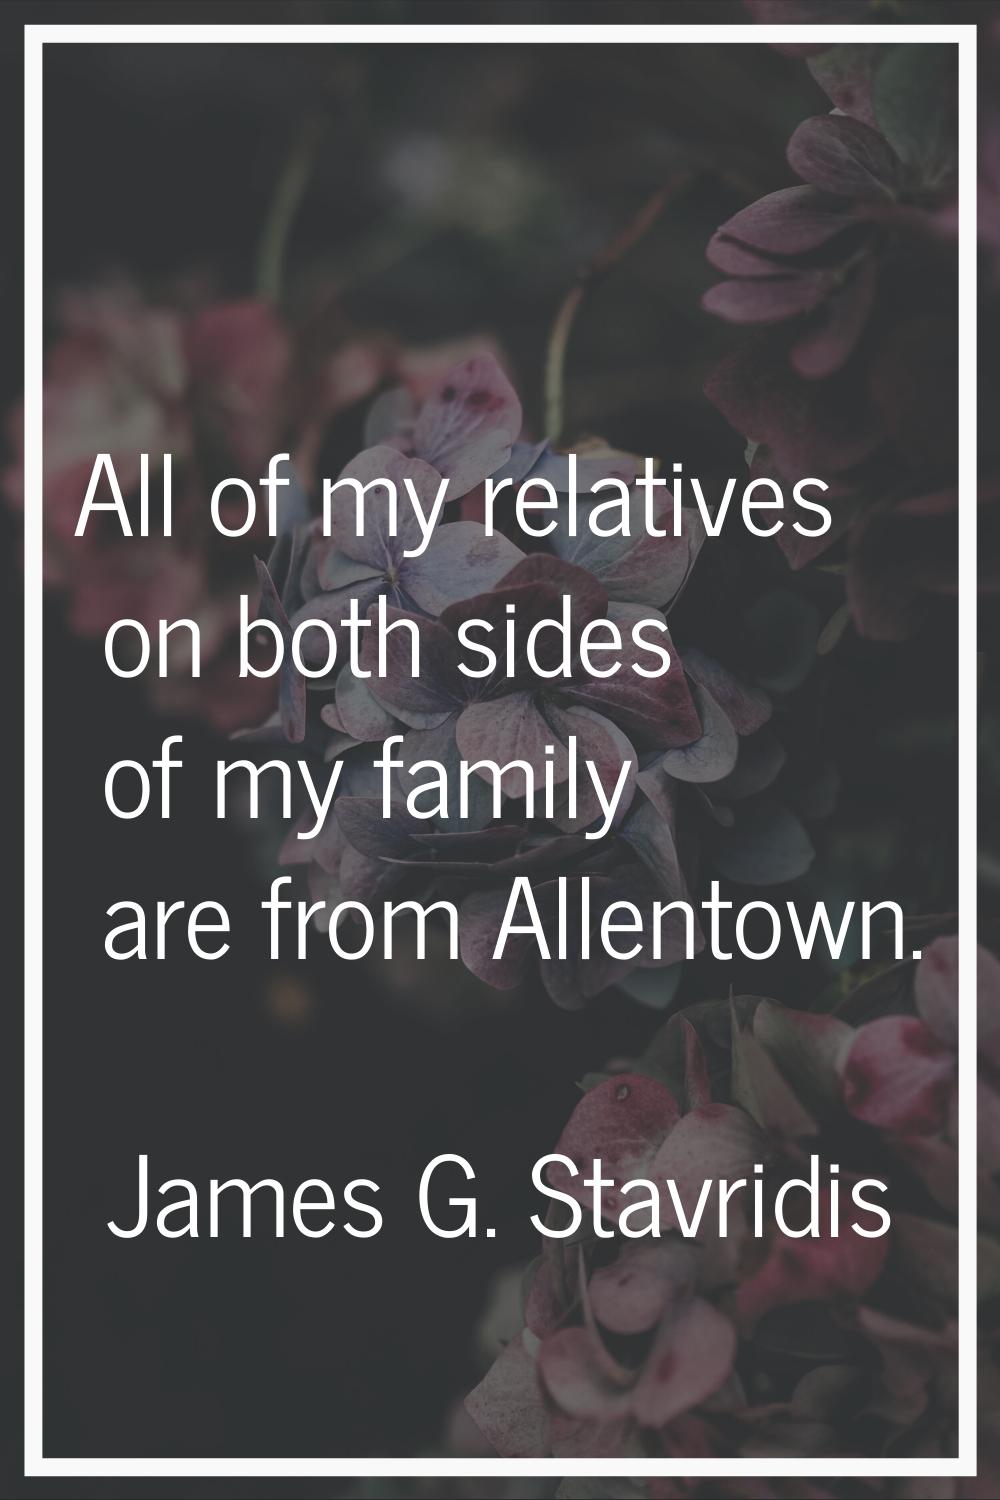 All of my relatives on both sides of my family are from Allentown.